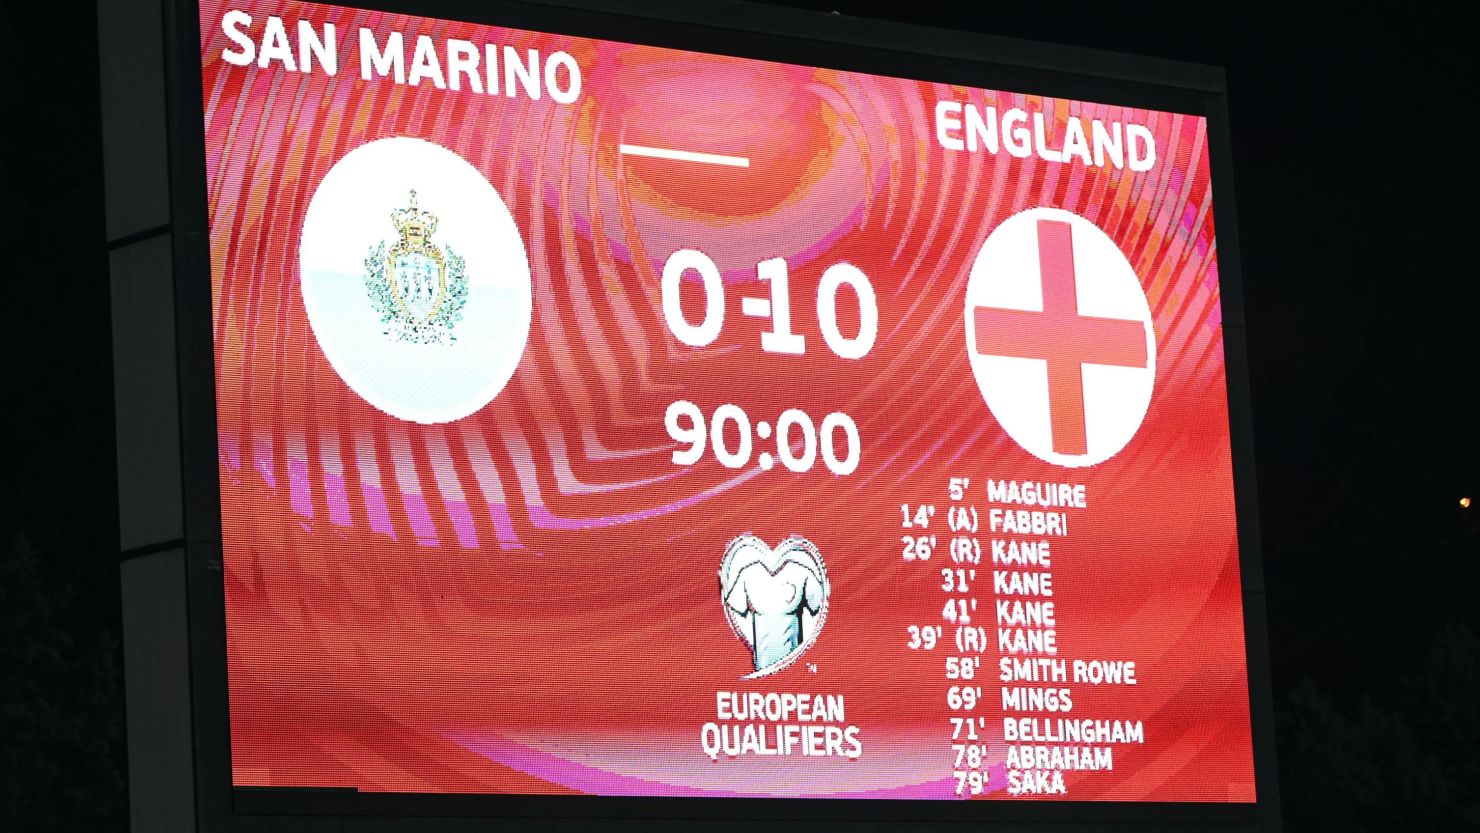 San Marino has won once in its last 186 matches.  